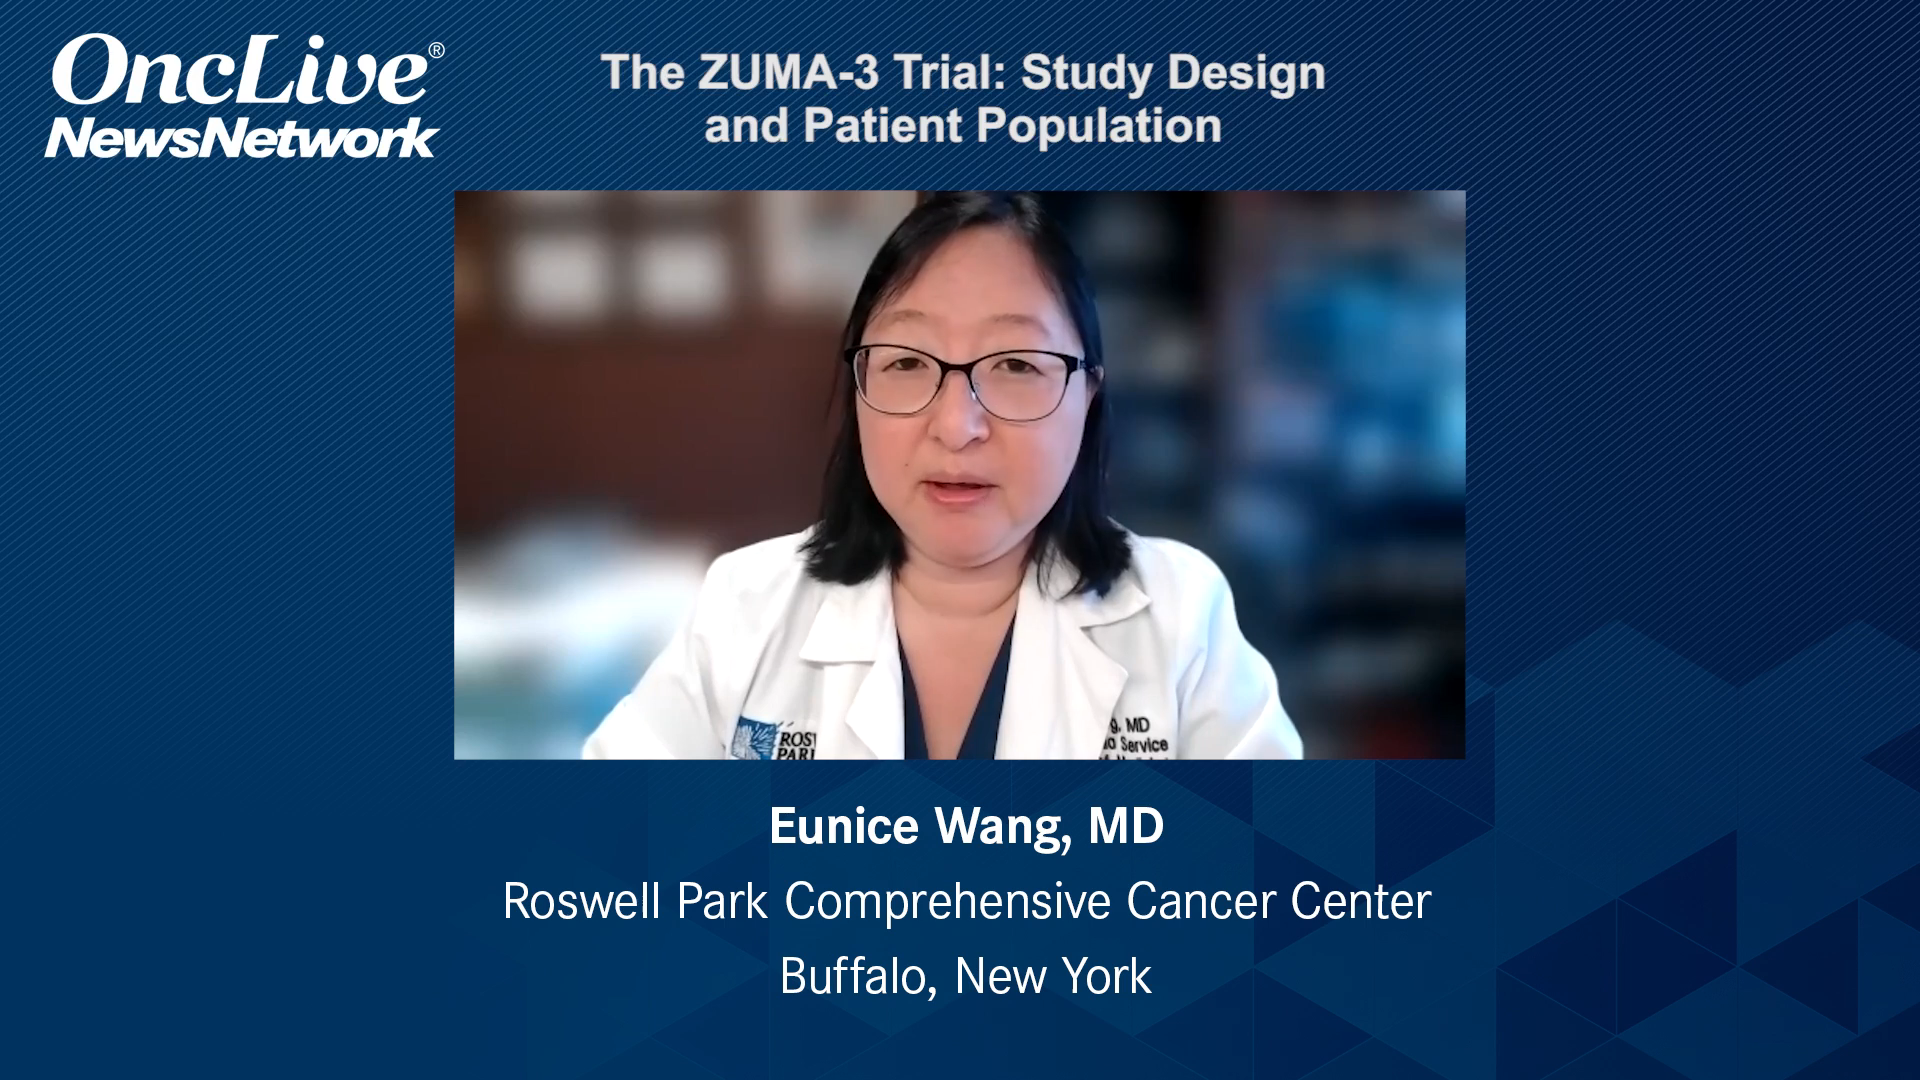 The ZUMA-3 Trial: Study Design and Patient Population